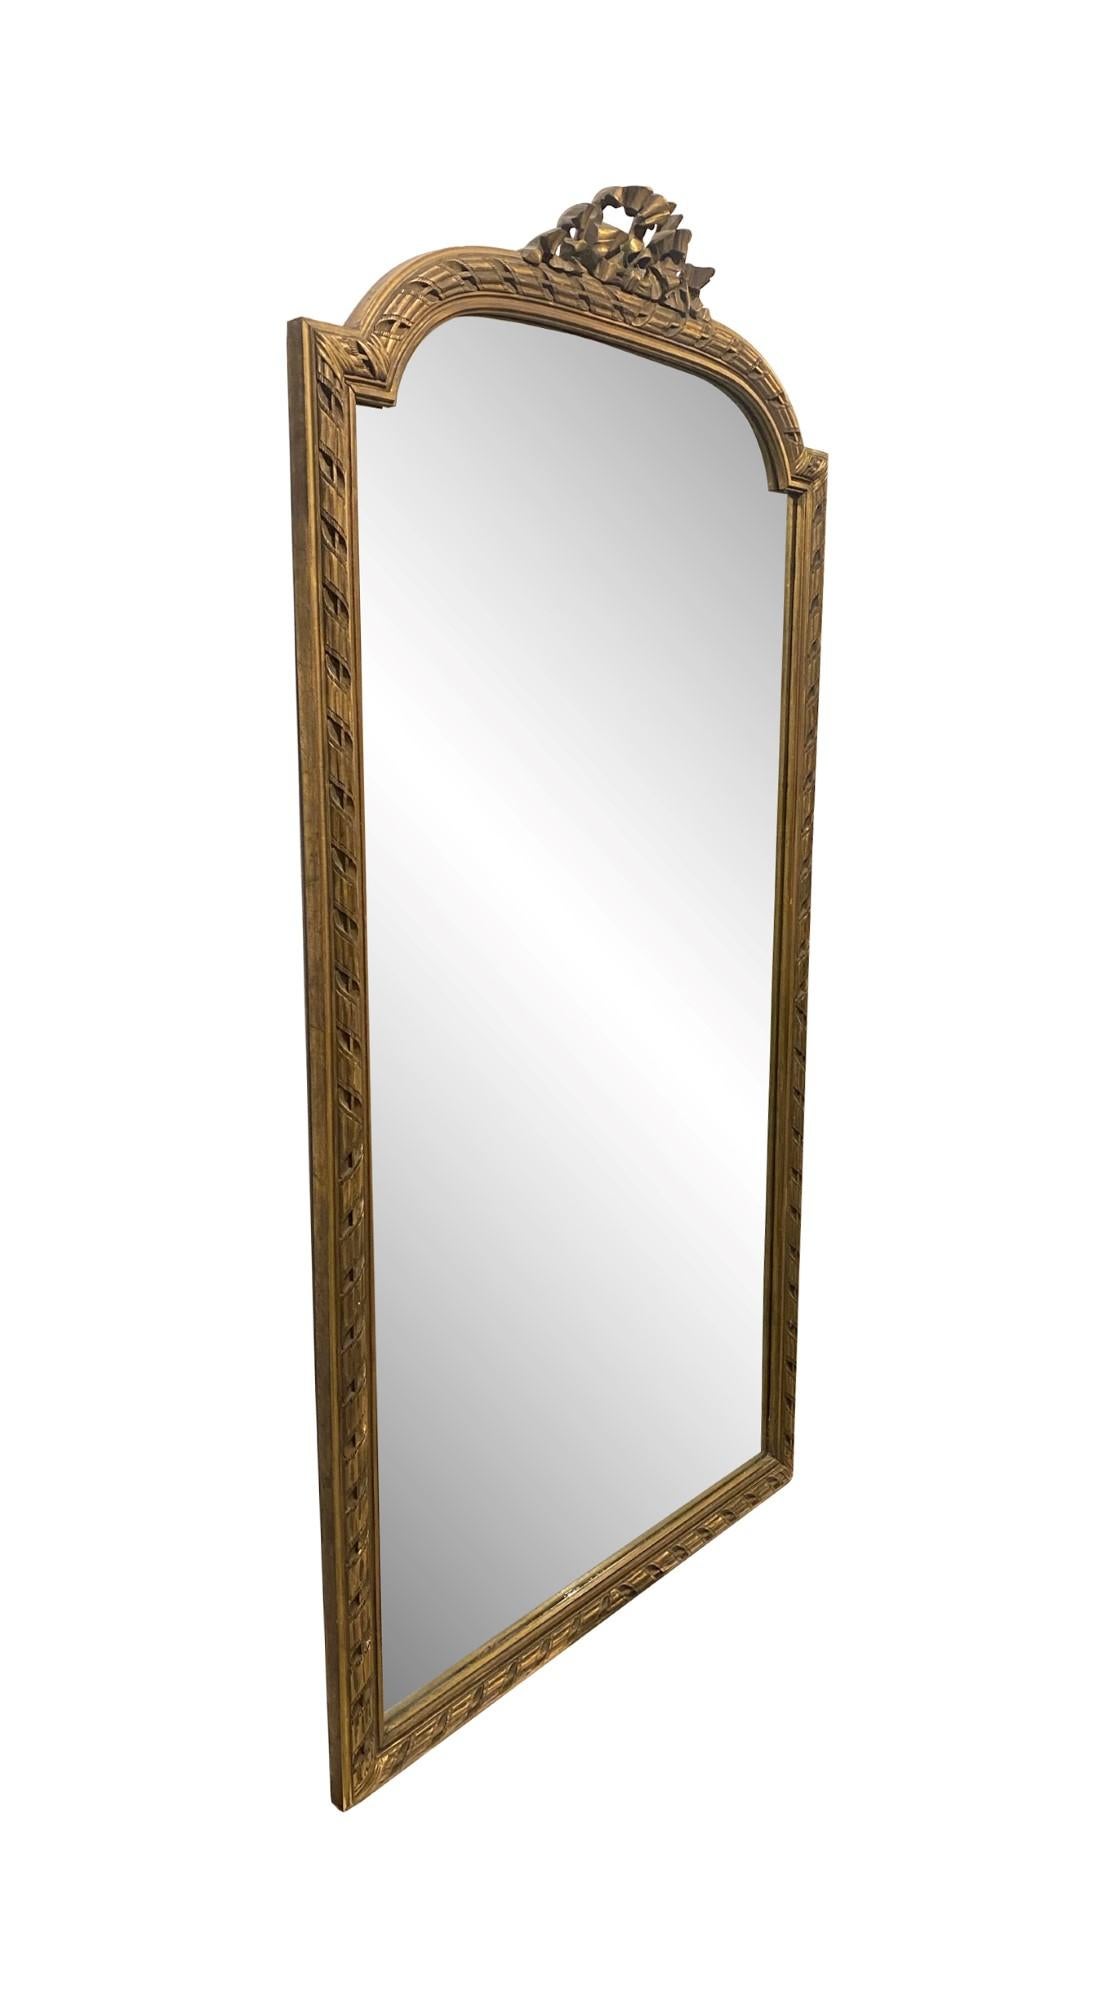 Early 20th C. Gilted Wood Mirror Louis XVI Style from France, Over Mantel 3